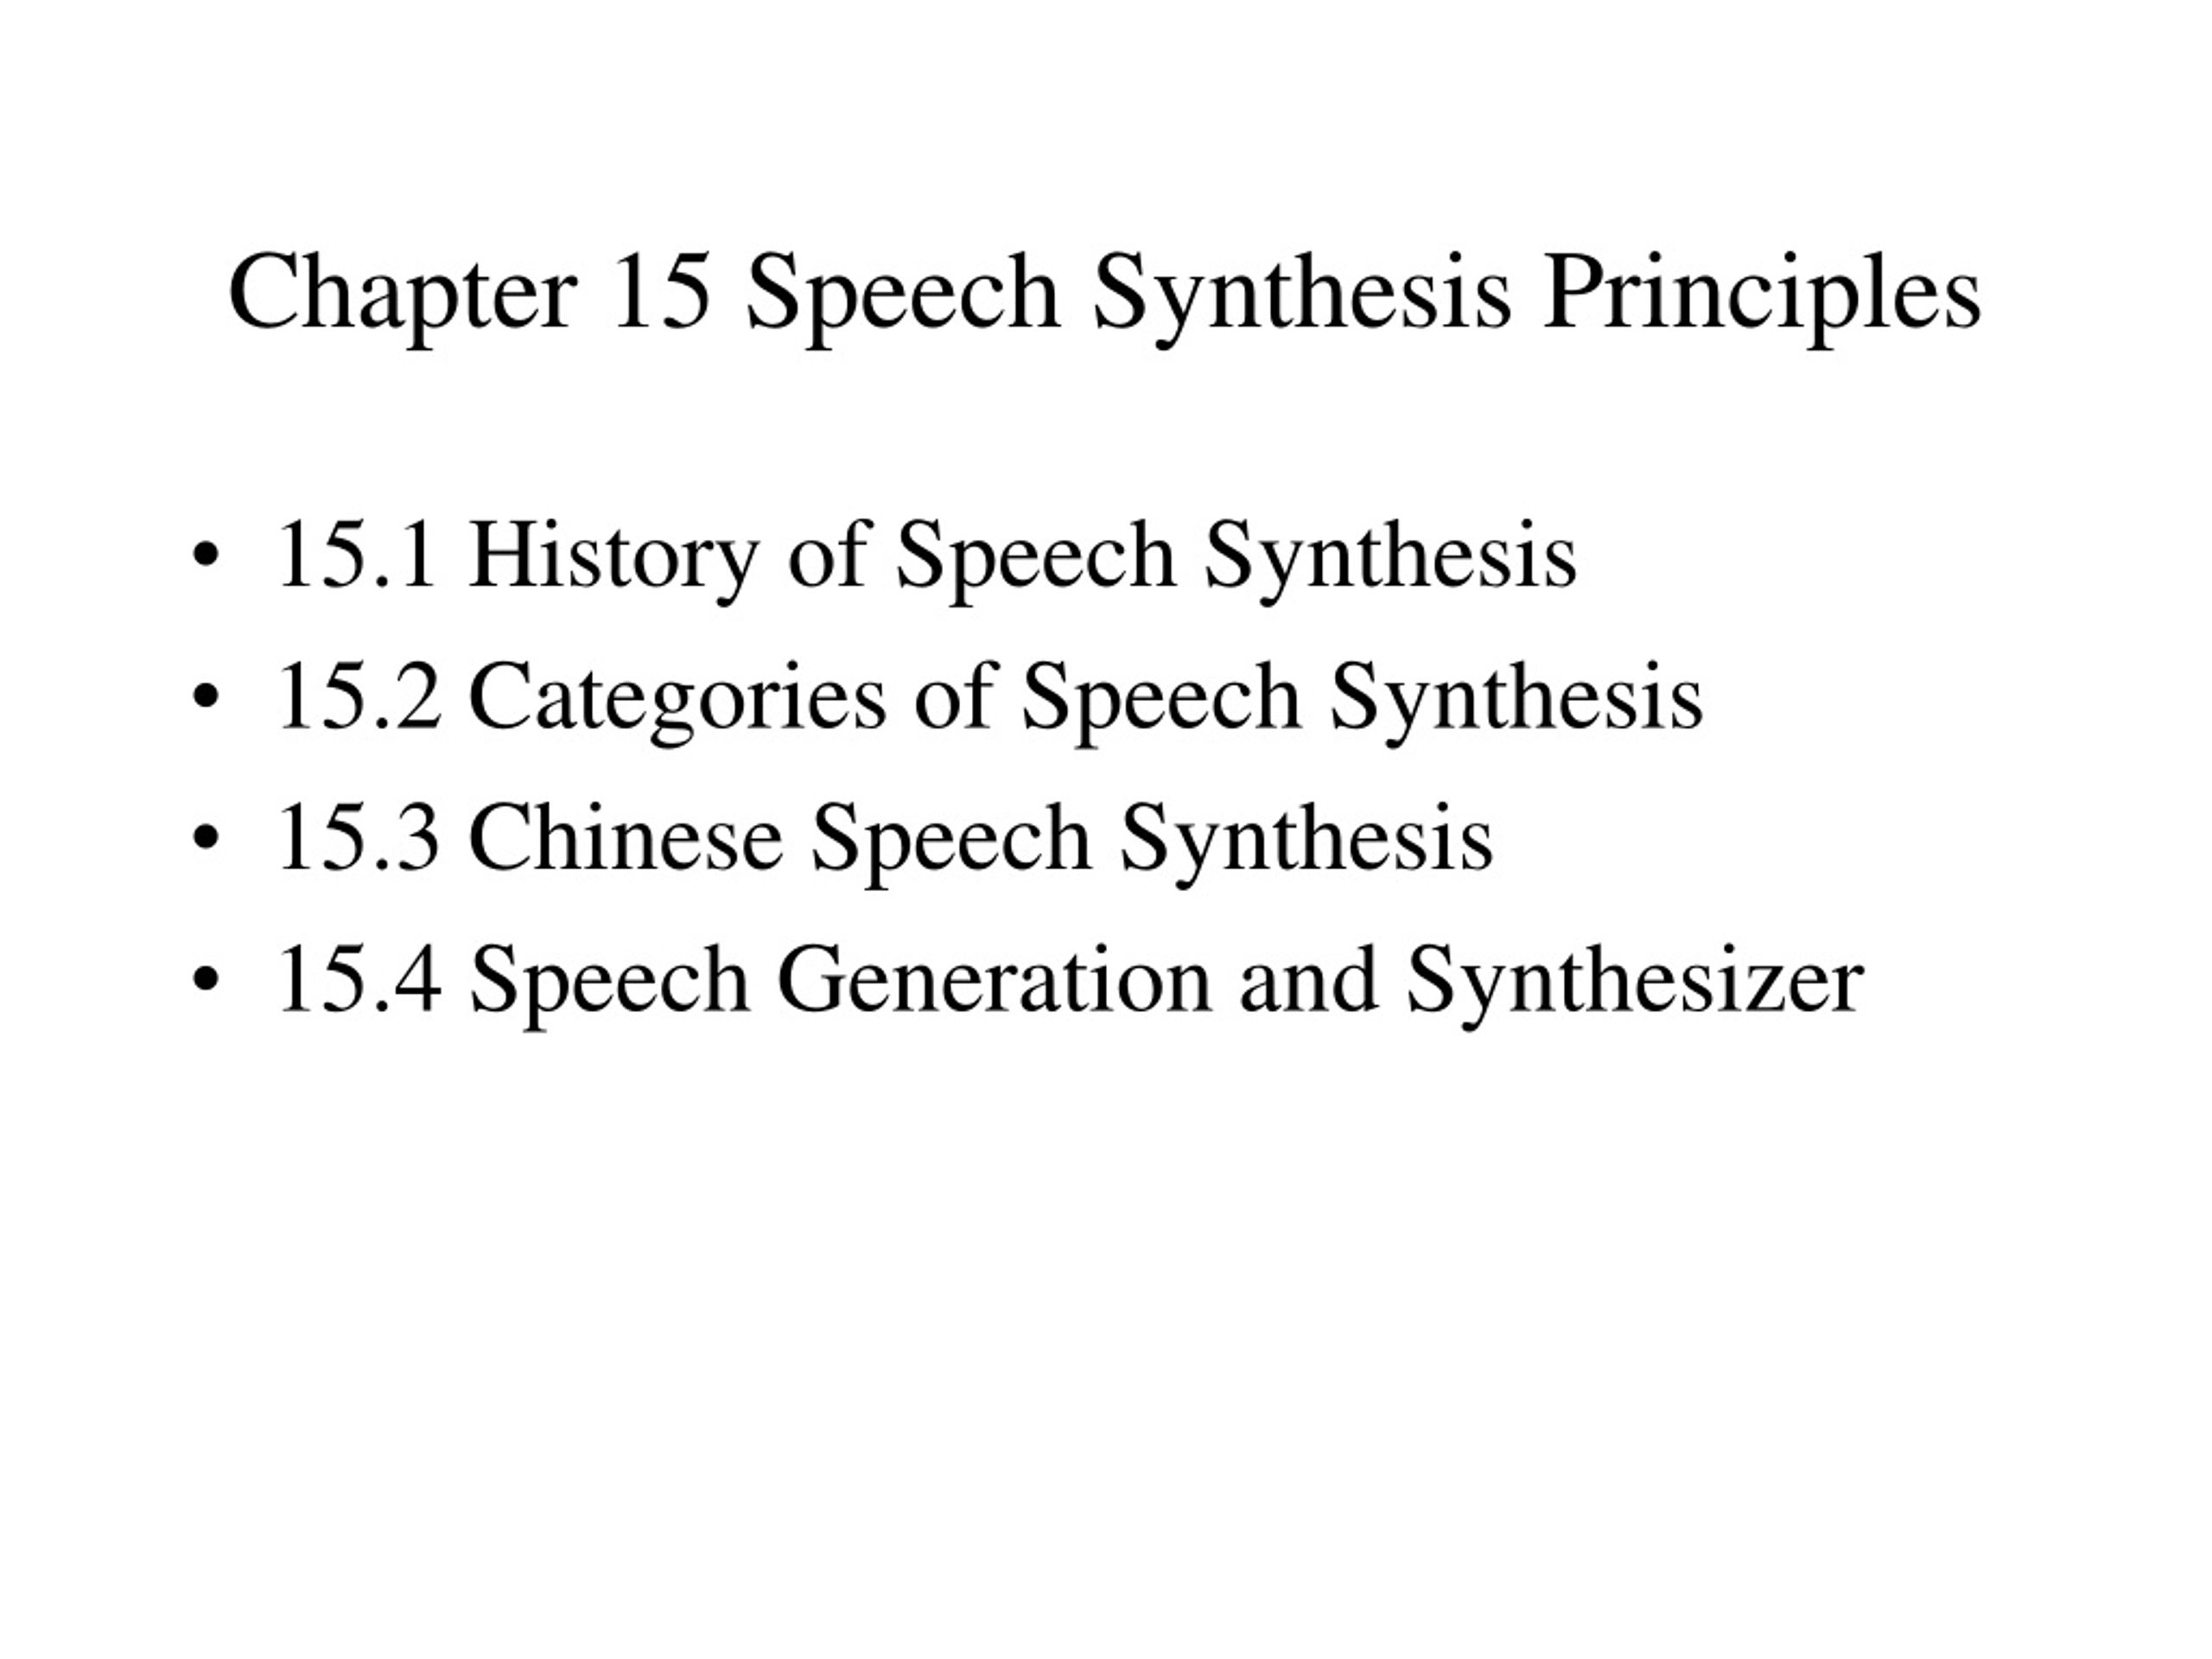 Ppt Chapter 15 Speech Synthesis Principles Powerpoint Presentation Free Download Id9145203 